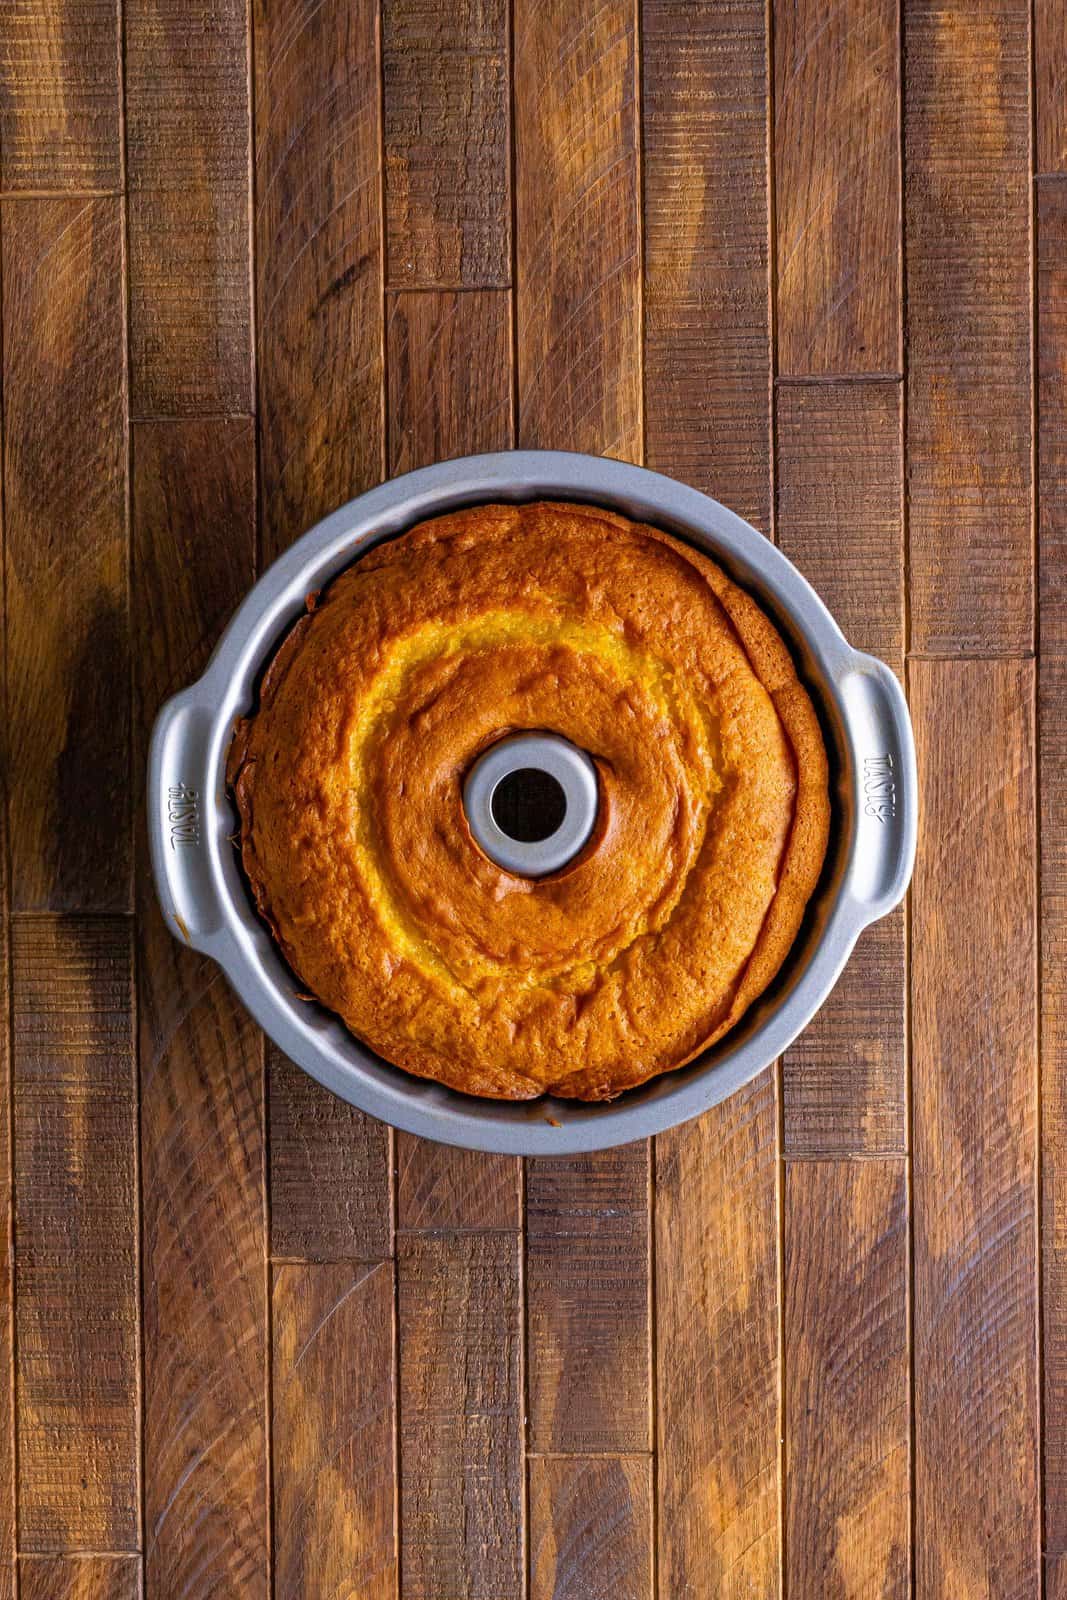 fully baked 7Up cake shown in a bundt pan on a wooden surface.